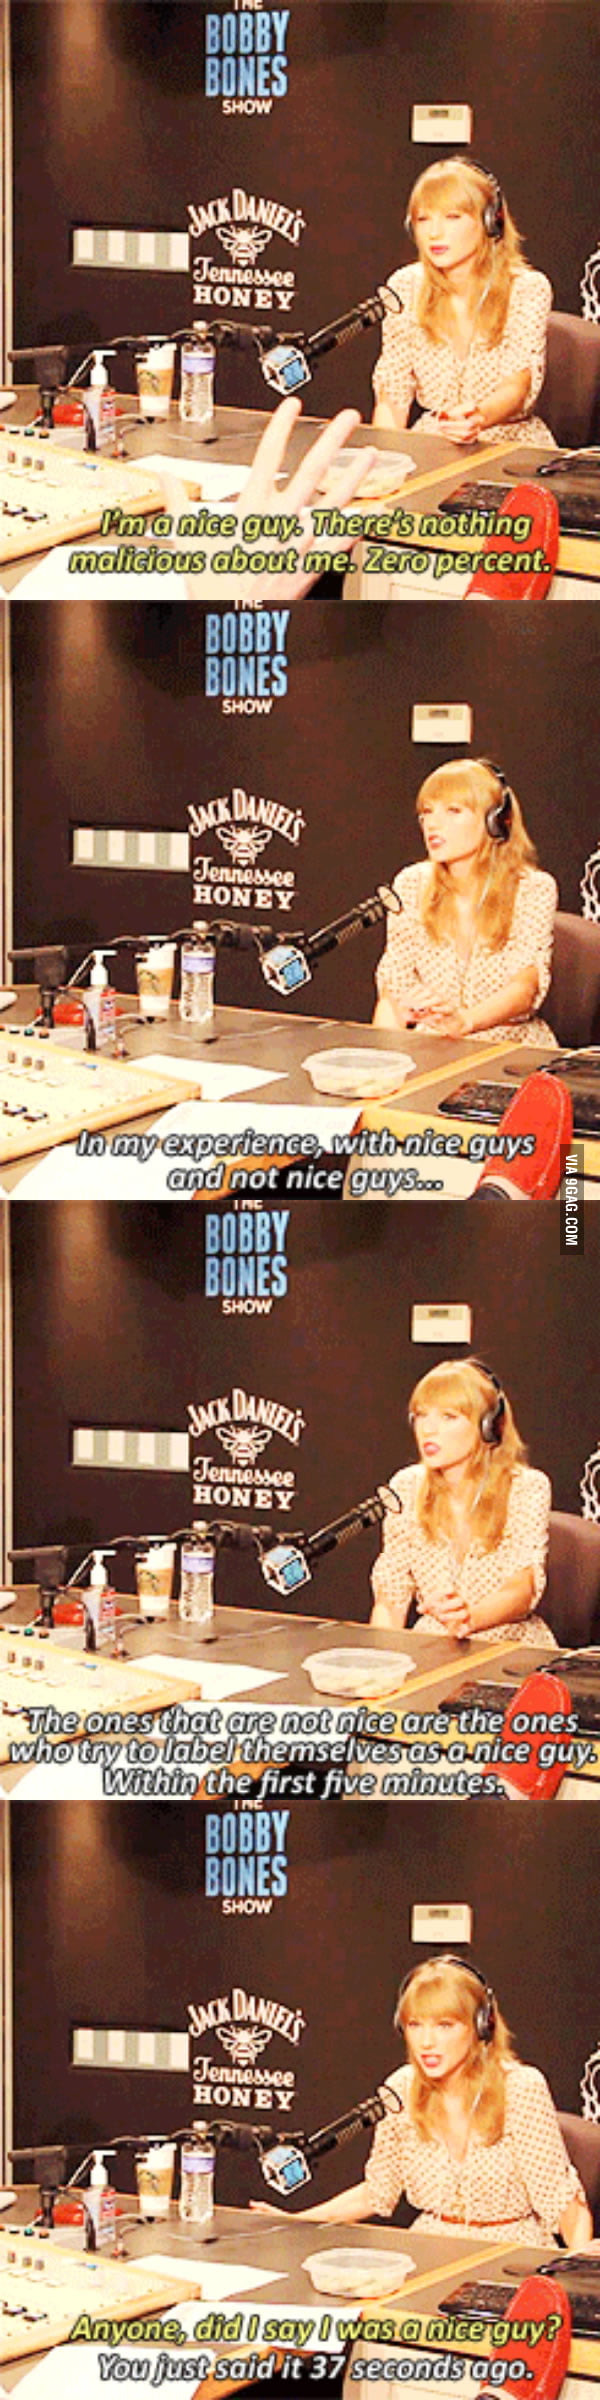 Taylor doesn't forgive. Taylor doesn't forget.